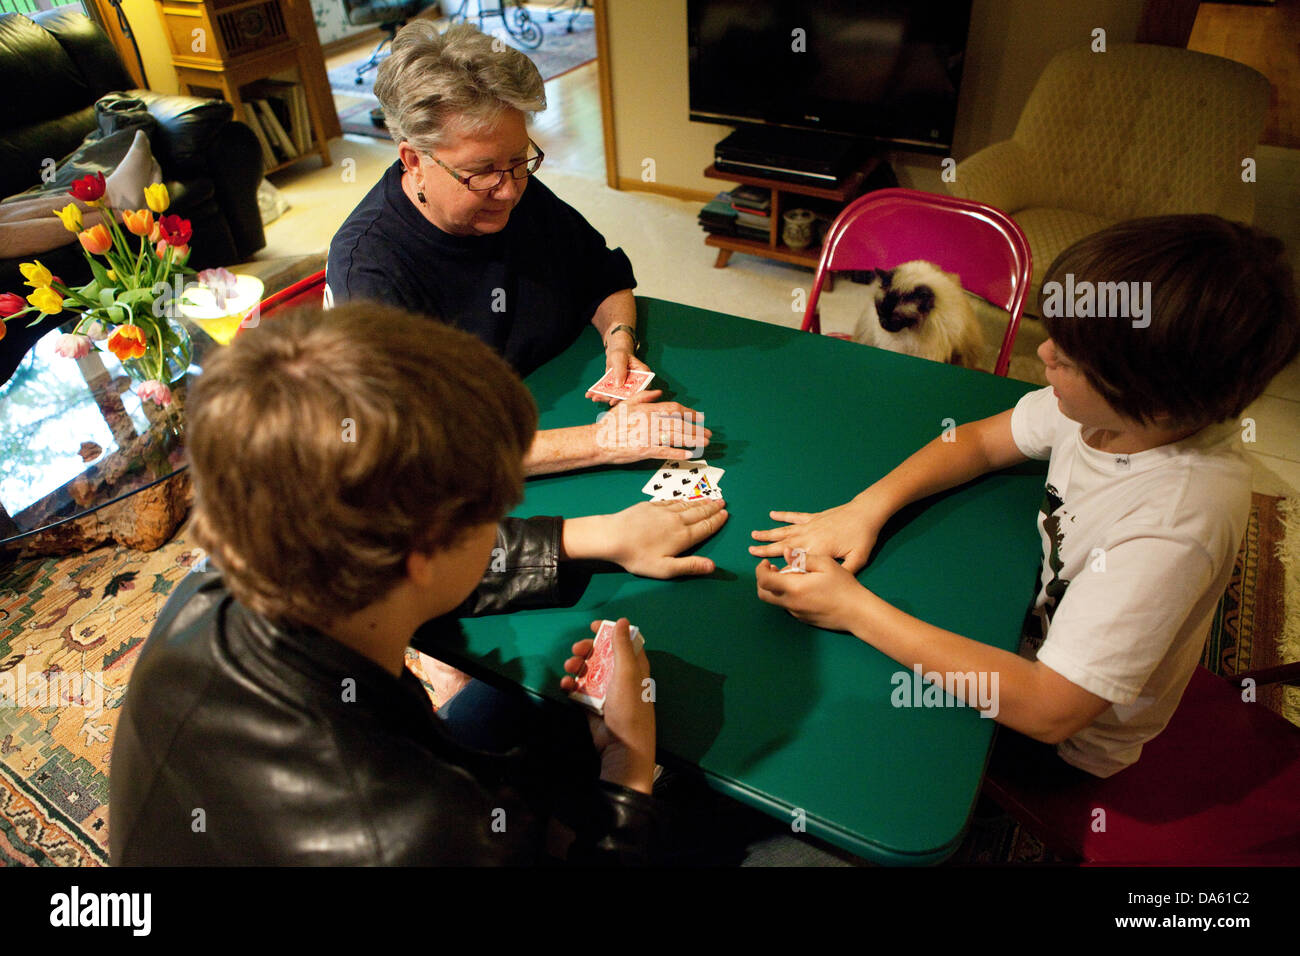 Family card game with cat sitting in a chair watching. Stock Photo